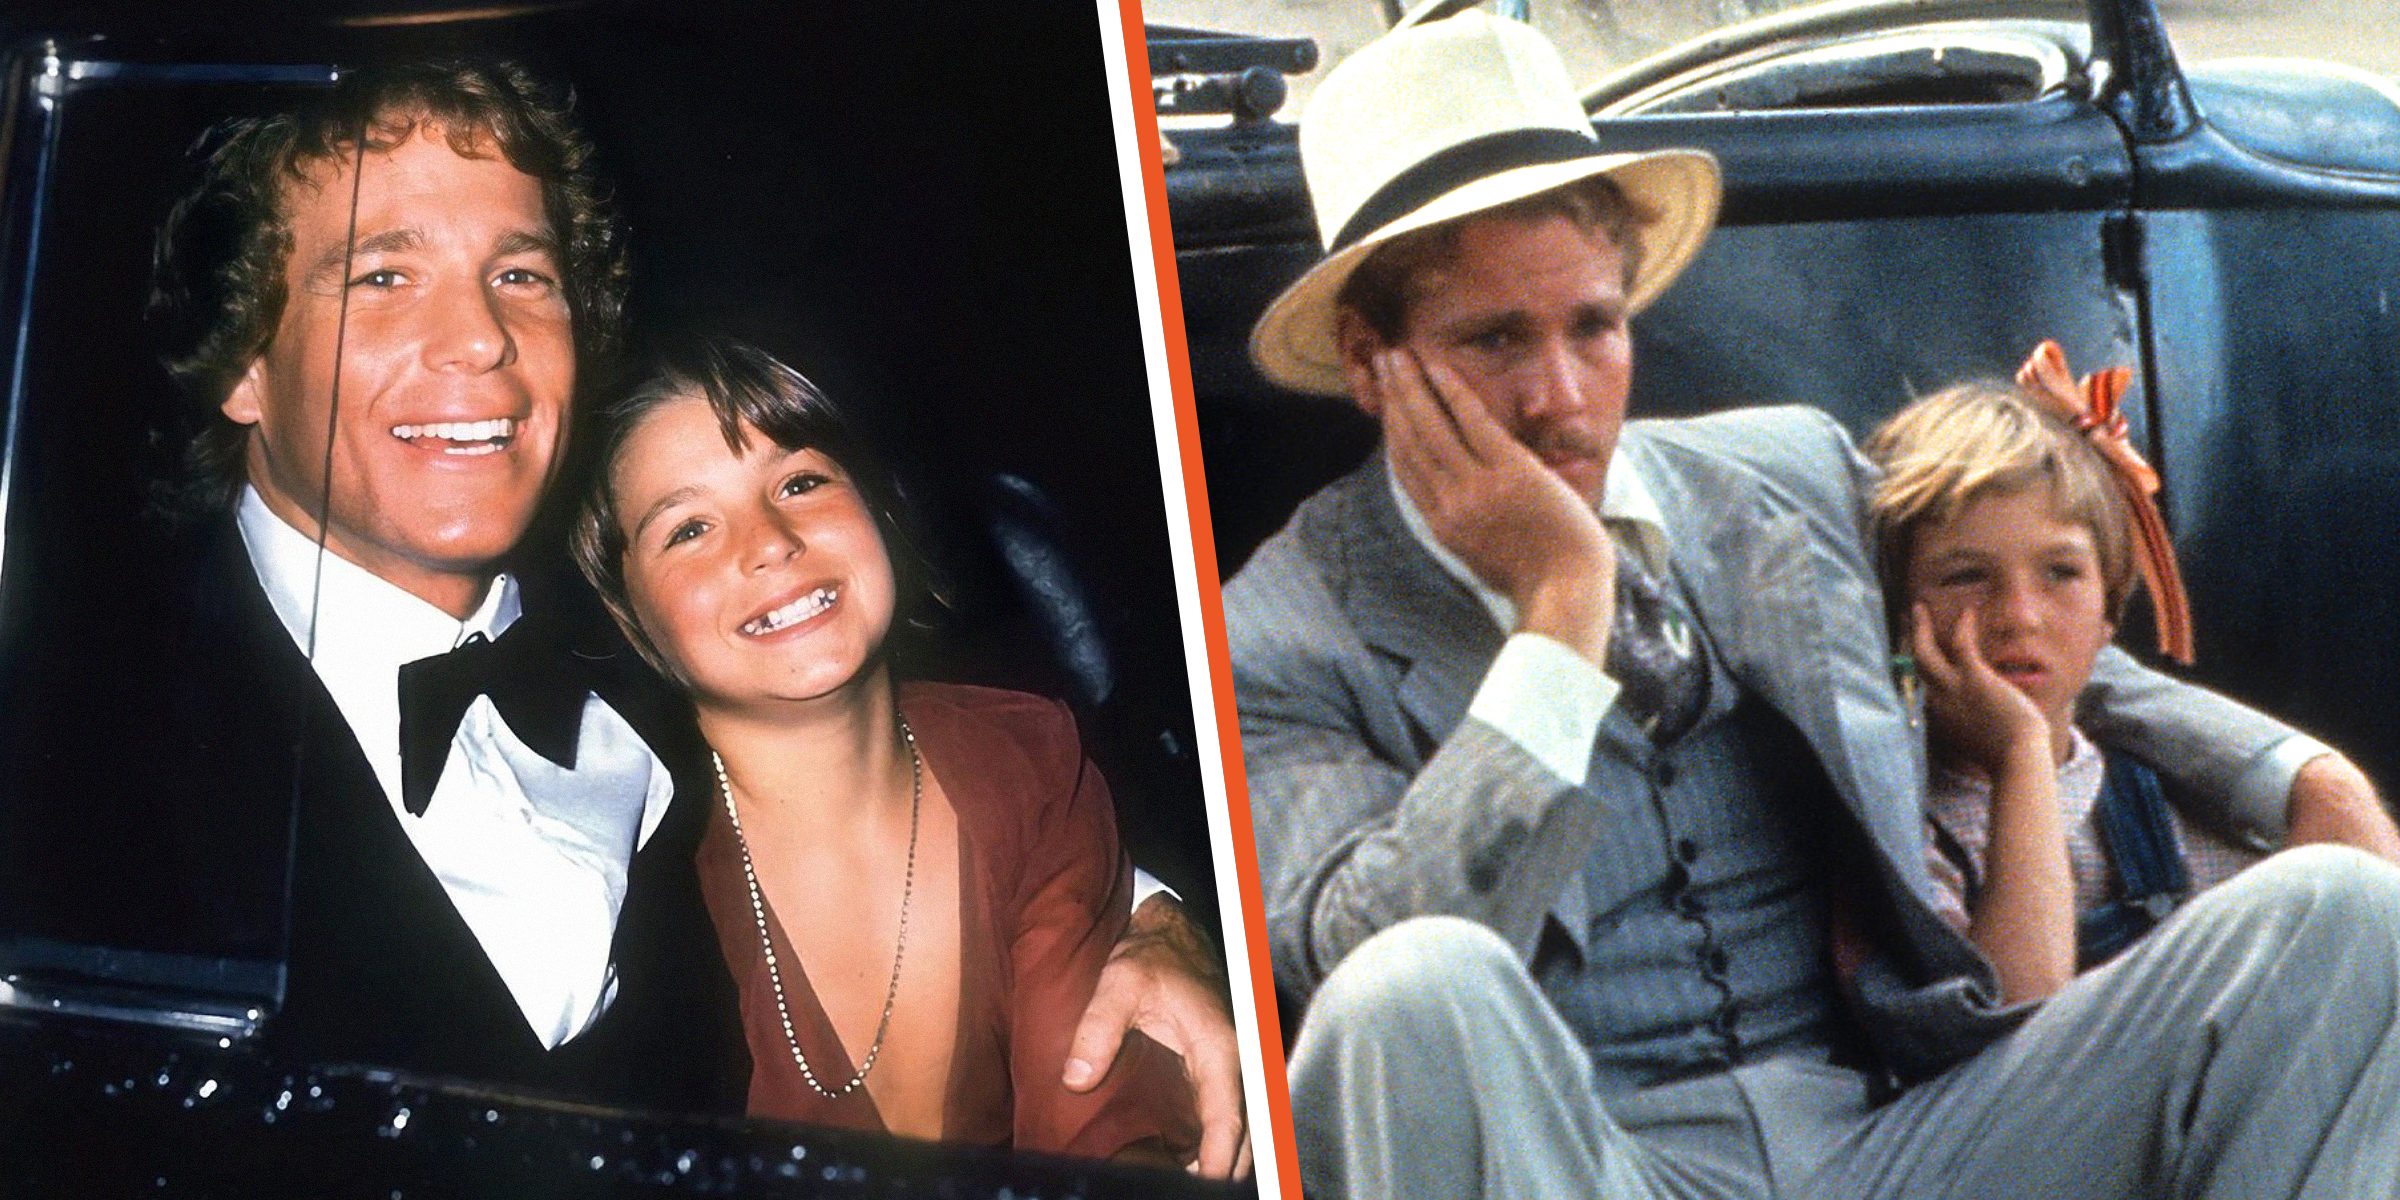 Ryan O'Neal und Tatum O'Neal, 2022 | Ryan O'Neal und Tatum O'Neal, 1973 | Quelle: Instagram.com/tatum__oneal | Getty Images